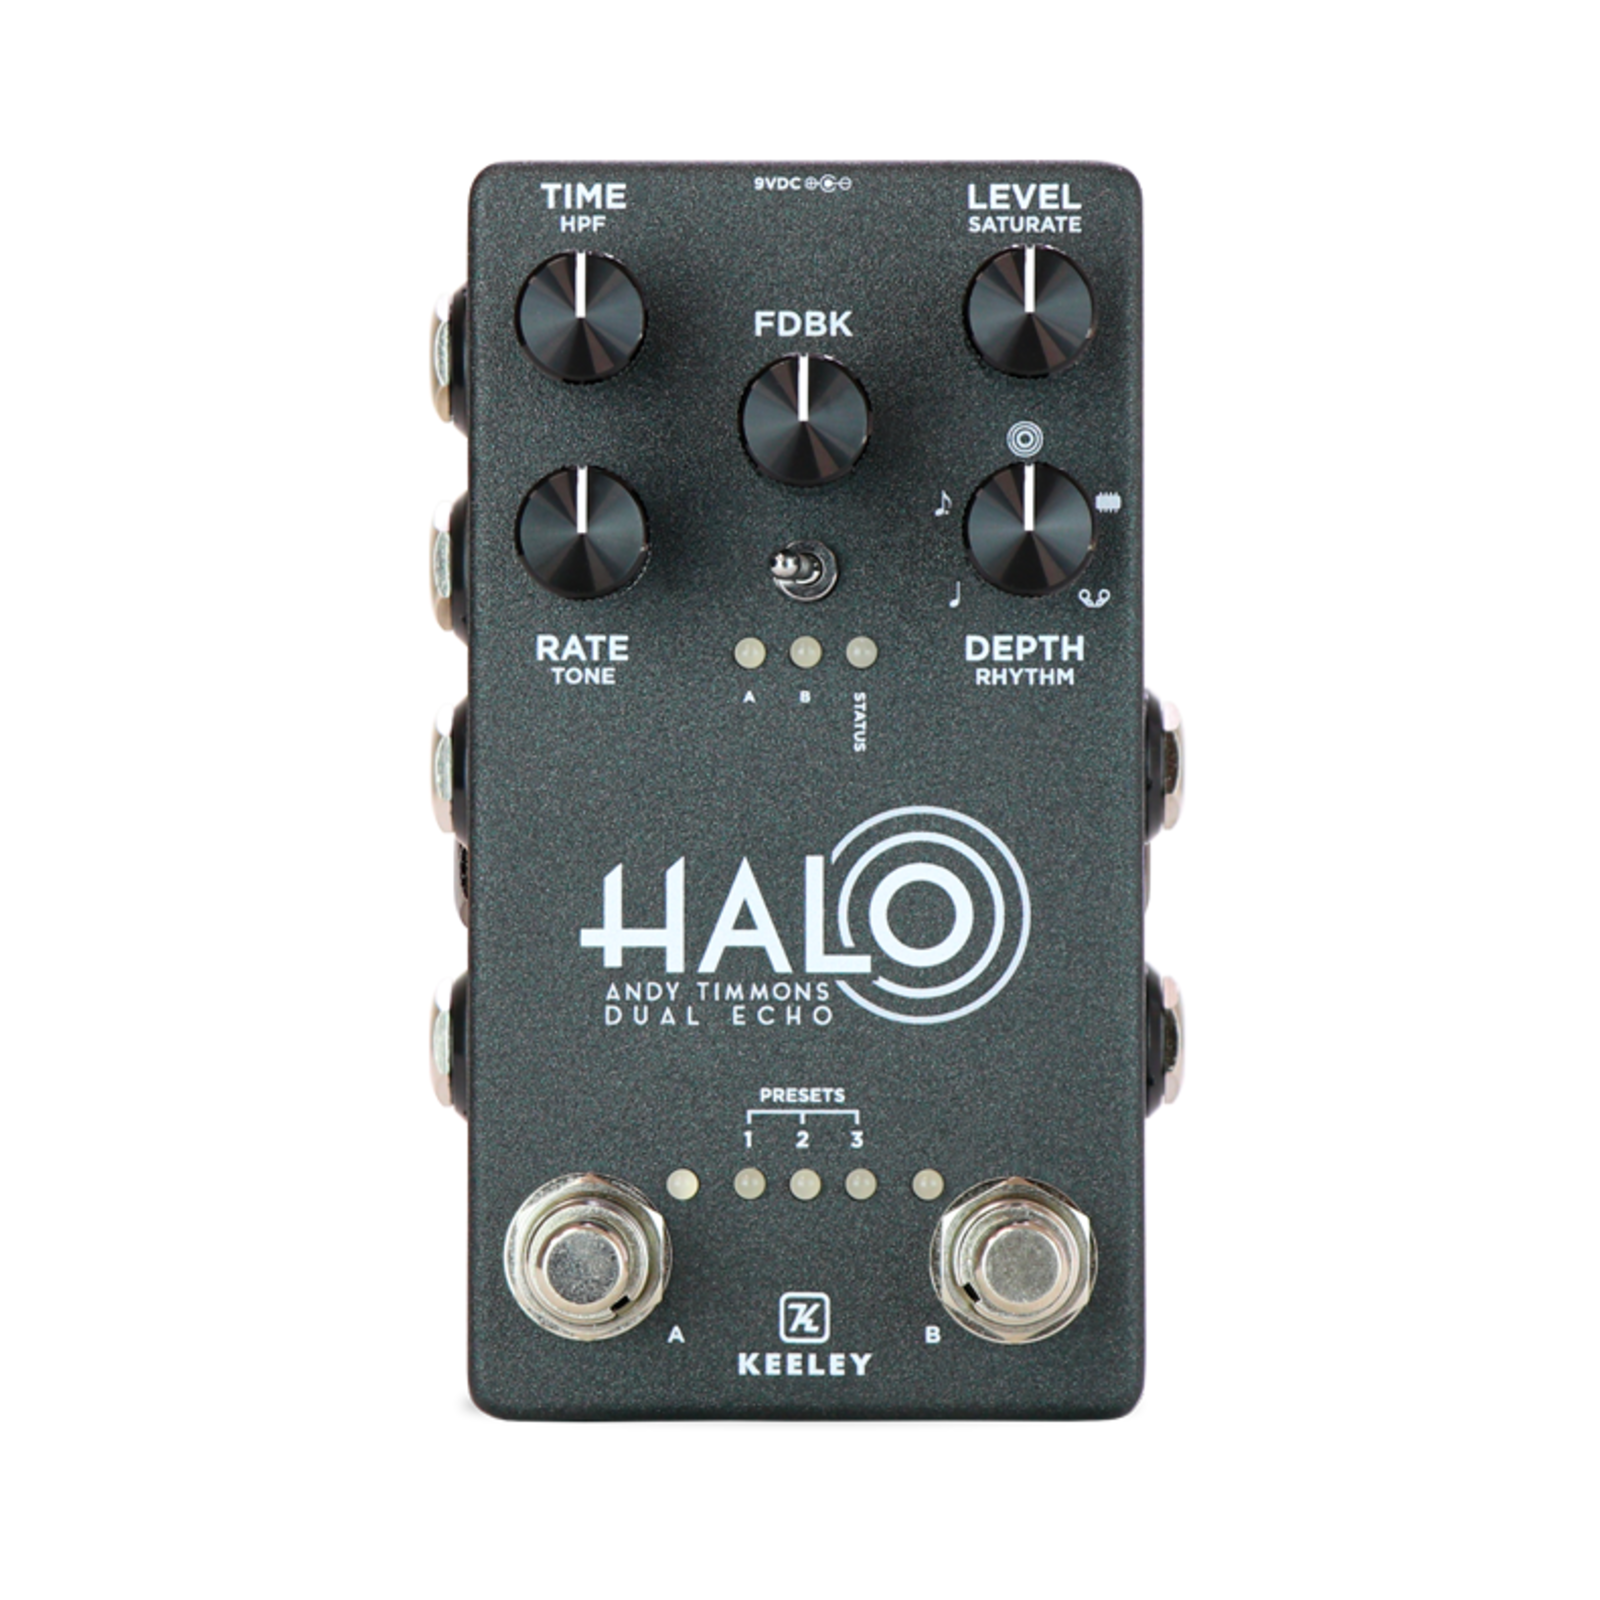 Keeley Electronics Halo Andy Timmons Dual Echo